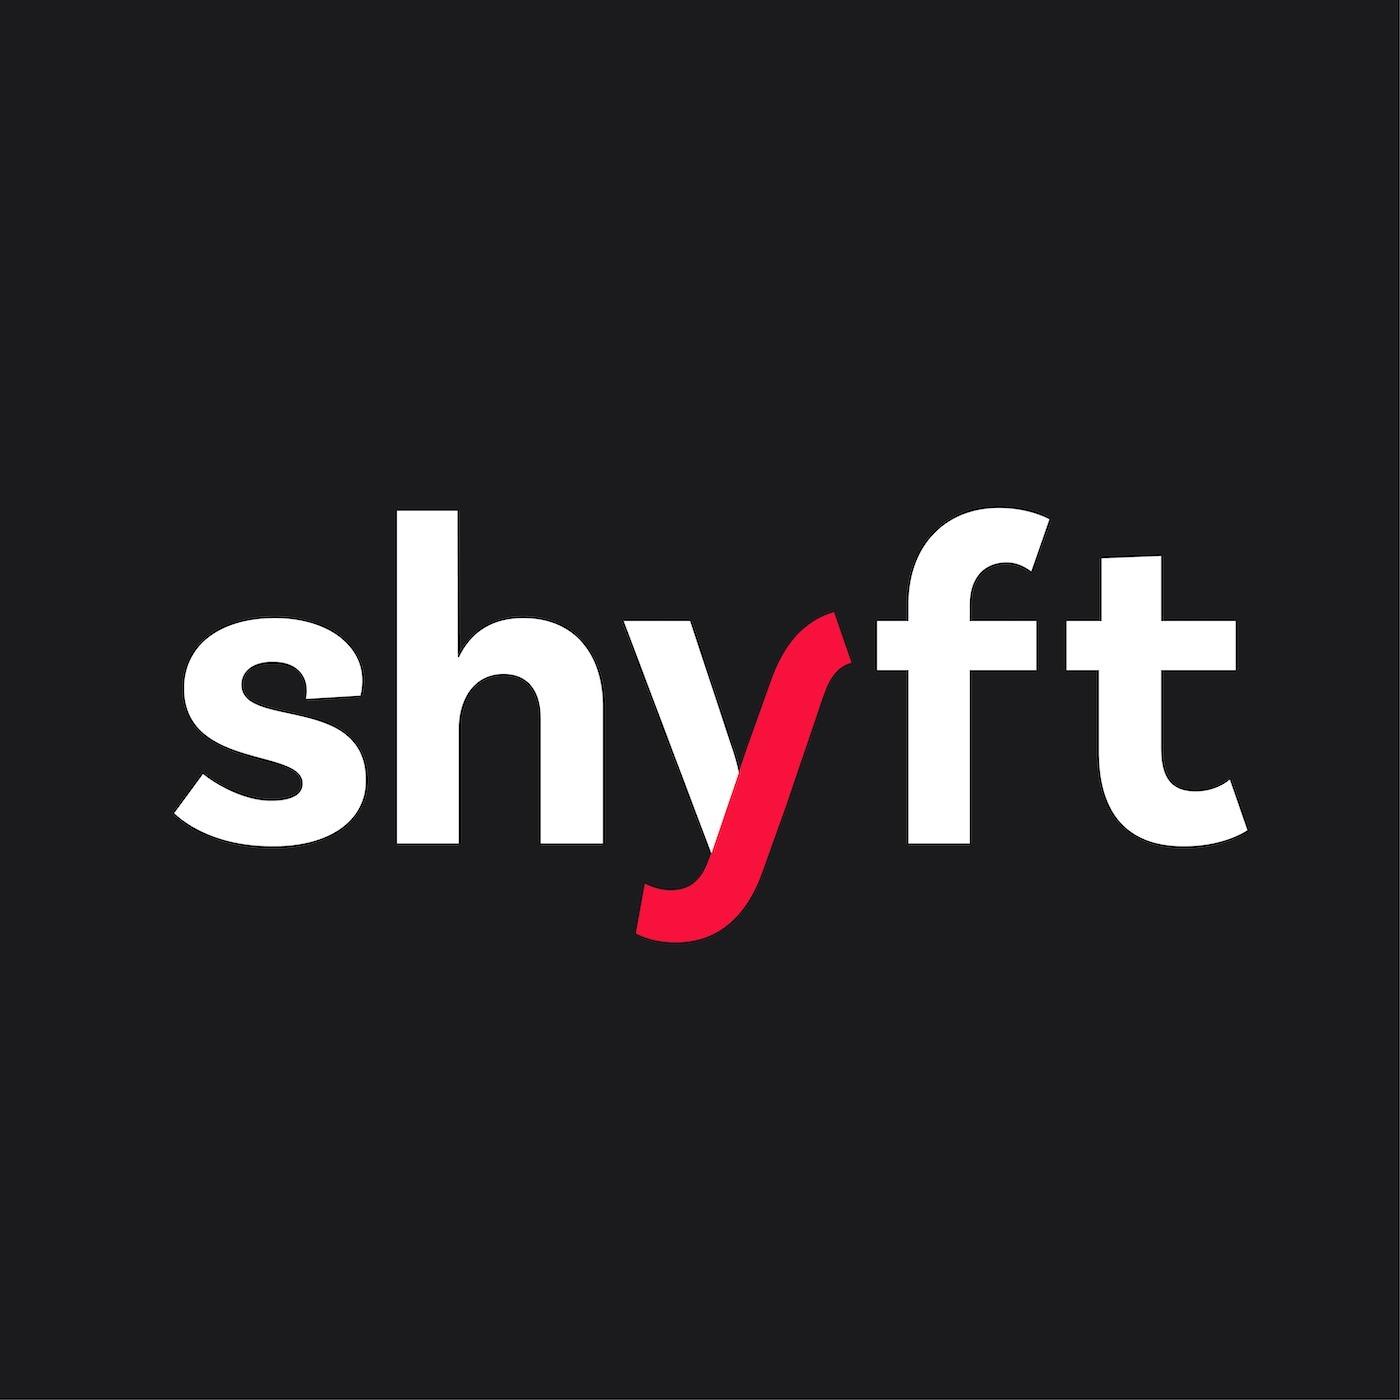 Shyft - Crypto projects simplified